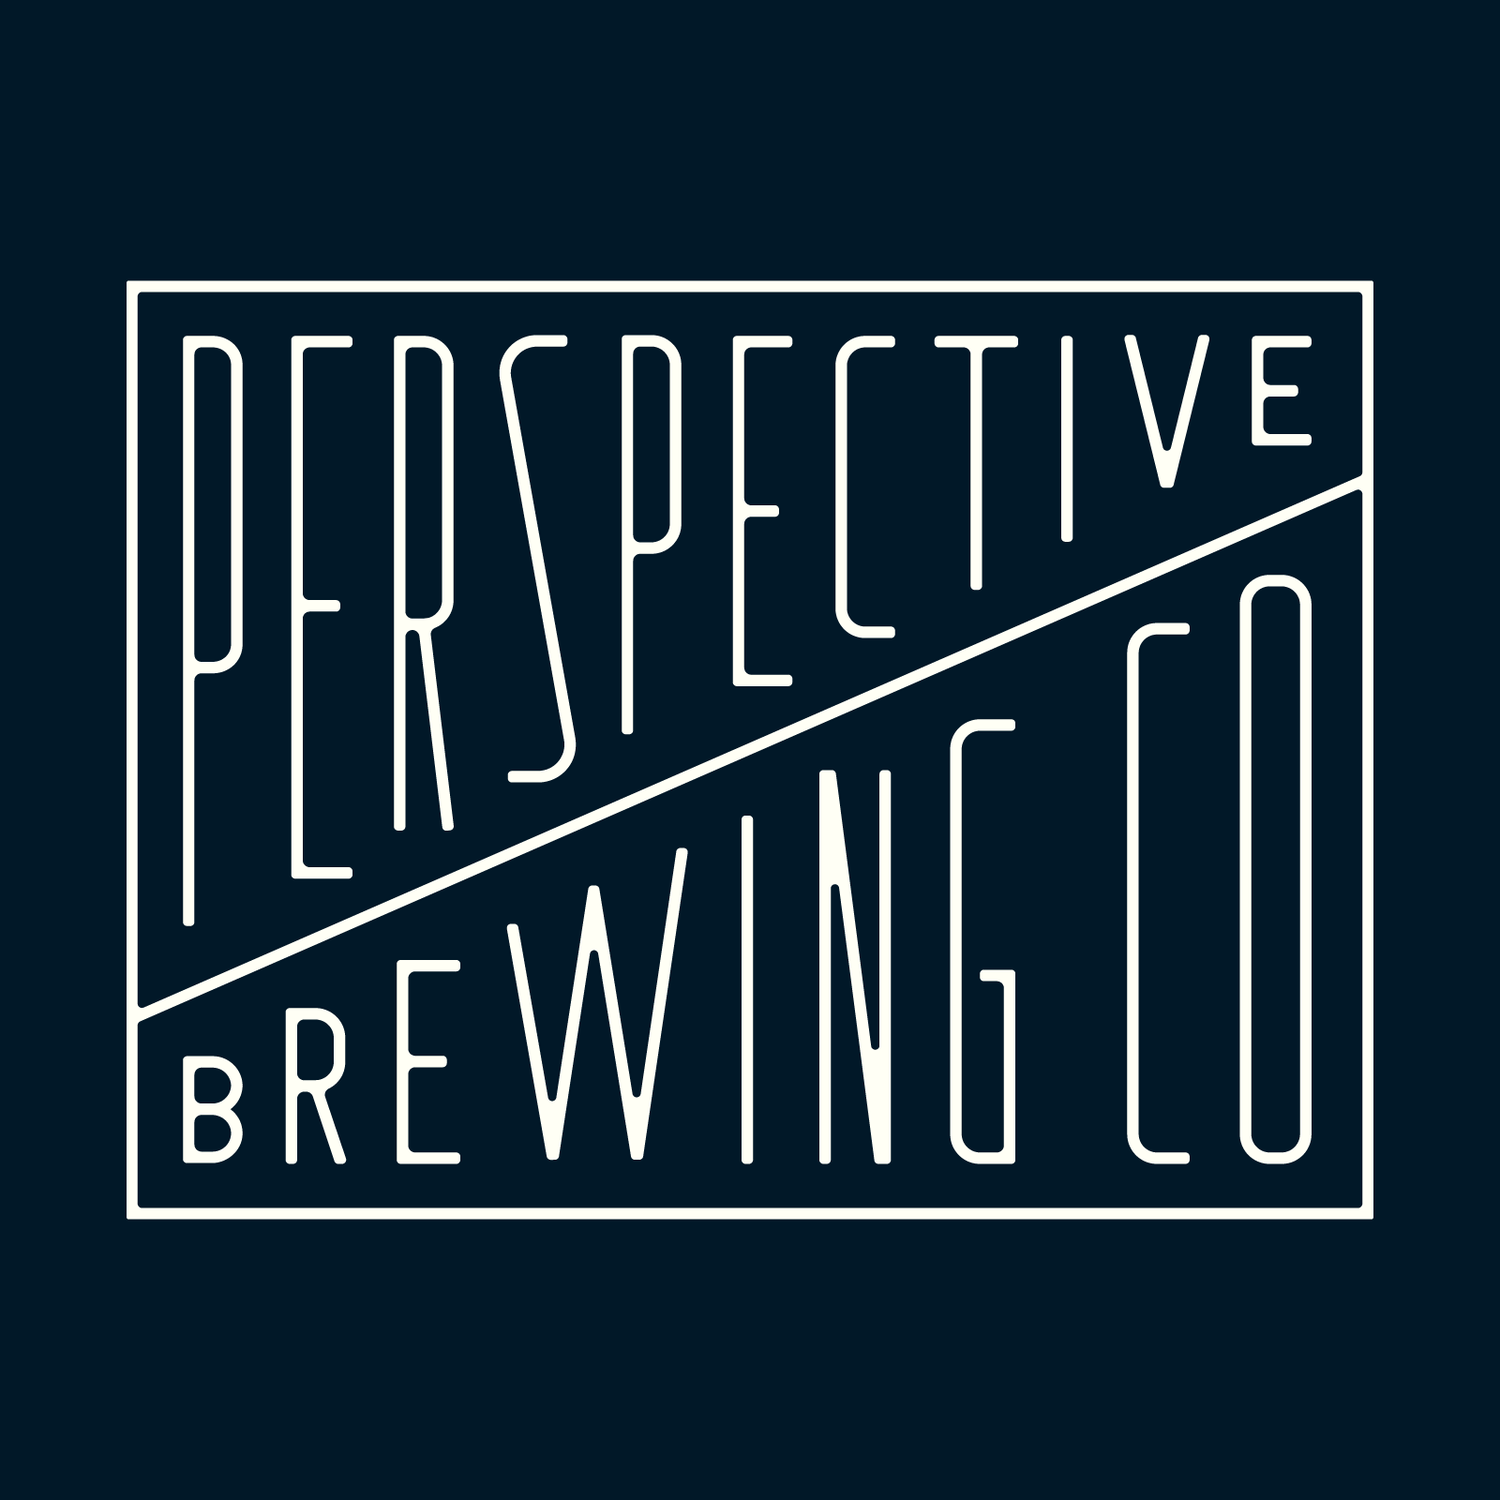 Perspective Brewing Co.